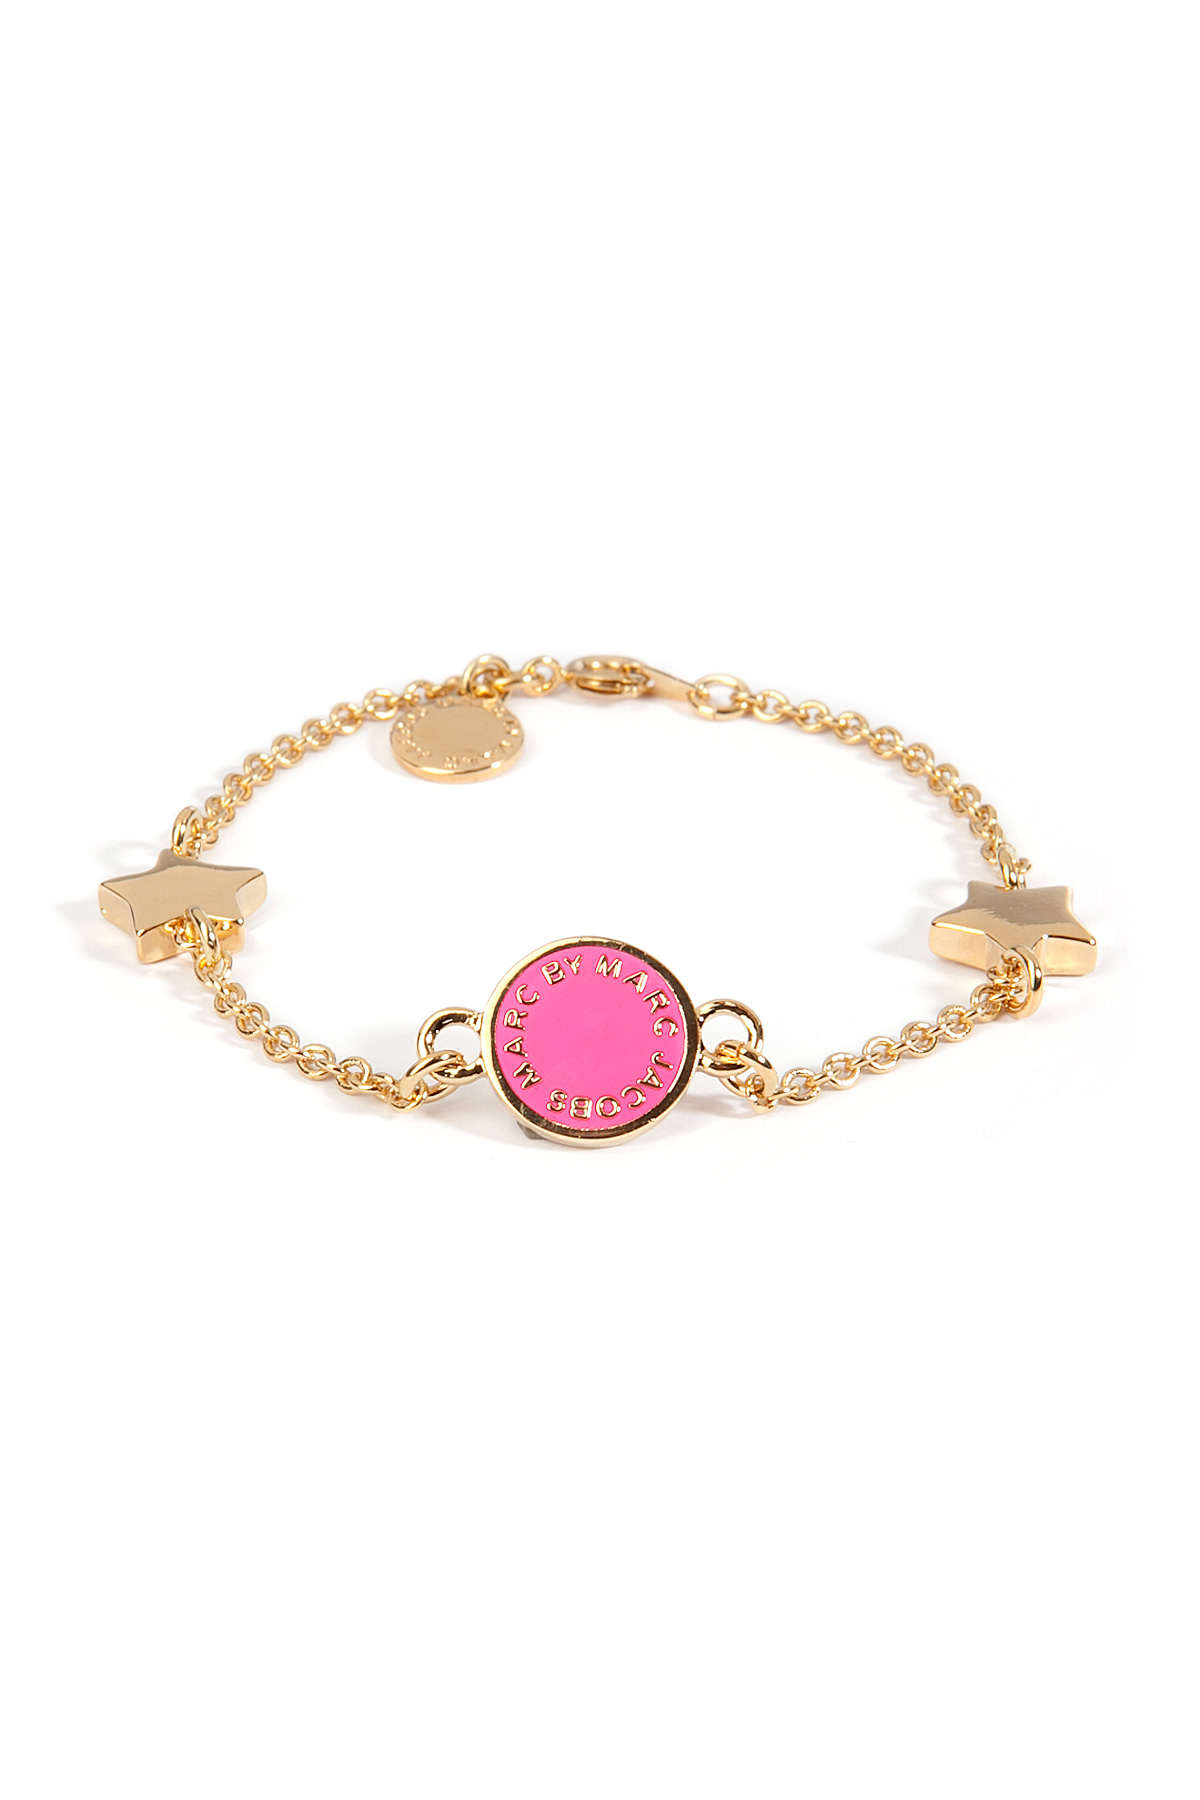 Marc by marc jacobs Medley Classic Marc Bracelet in Knockout Pink in ...